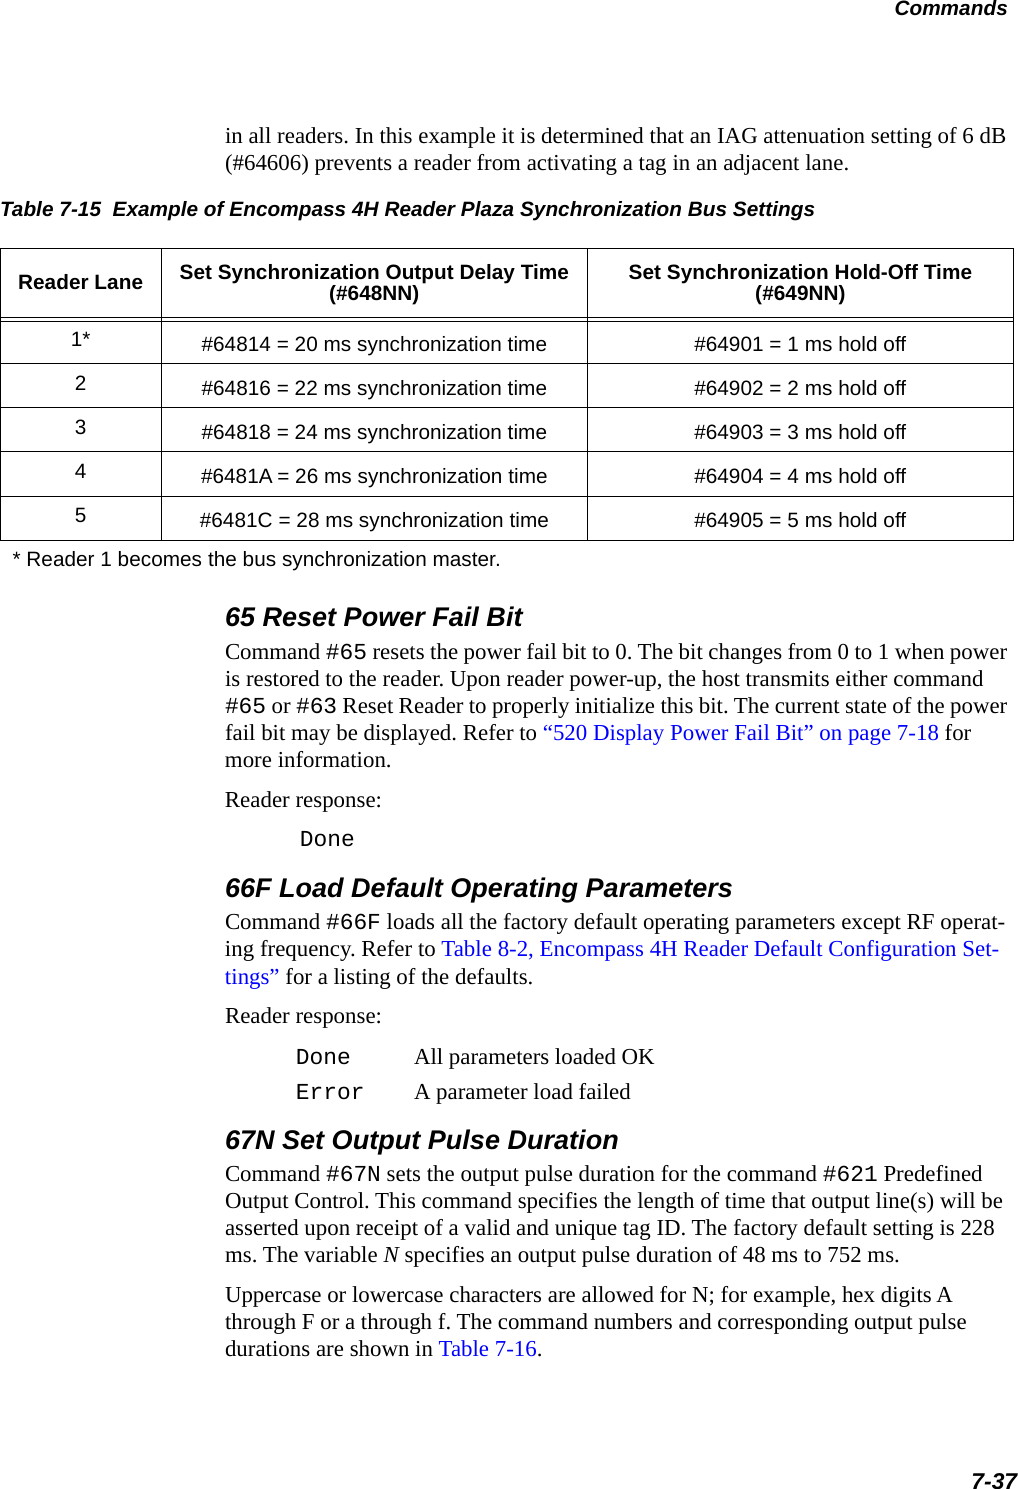 Commands7-37in all readers. In this example it is determined that an IAG attenuation setting of 6 dB (#64606) prevents a reader from activating a tag in an adjacent lane.Table 7-15  Example of Encompass 4H Reader Plaza Synchronization Bus SettingsReader Lane Set Synchronization Output Delay Time (#648NN) Set Synchronization Hold-Off Time (#649NN)1* #64814 = 20 ms synchronization time #64901 = 1 ms hold off2#64816 = 22 ms synchronization time #64902 = 2 ms hold off3#64818 = 24 ms synchronization time #64903 = 3 ms hold off4#6481A = 26 ms synchronization time #64904 = 4 ms hold off5#6481C = 28 ms synchronization time #64905 = 5 ms hold off* Reader 1 becomes the bus synchronization master.65 Reset Power Fail BitCommand #65 resets the power fail bit to 0. The bit changes from 0 to 1 when power is restored to the reader. Upon reader power-up, the host transmits either command #65 or #63 Reset Reader to properly initialize this bit. The current state of the power fail bit may be displayed. Refer to “520 Display Power Fail Bit” on page 7-18 for more information.Reader response:Done66F Load Default Operating ParametersCommand #66F loads all the factory default operating parameters except RF operat-ing frequency. Refer to Table 8-2, Encompass 4H Reader Default Configuration Set-tings” for a listing of the defaults.Reader response:Done All parameters loaded OKError A parameter load failed67N Set Output Pulse DurationCommand #67N sets the output pulse duration for the command #621 Predefined Output Control. This command specifies the length of time that output line(s) will be asserted upon receipt of a valid and unique tag ID. The factory default setting is 228 ms. The variable N specifies an output pulse duration of 48 ms to 752 ms.Uppercase or lowercase characters are allowed for N; for example, hex digits A through F or a through f. The command numbers and corresponding output pulse durations are shown in Table 7-16.